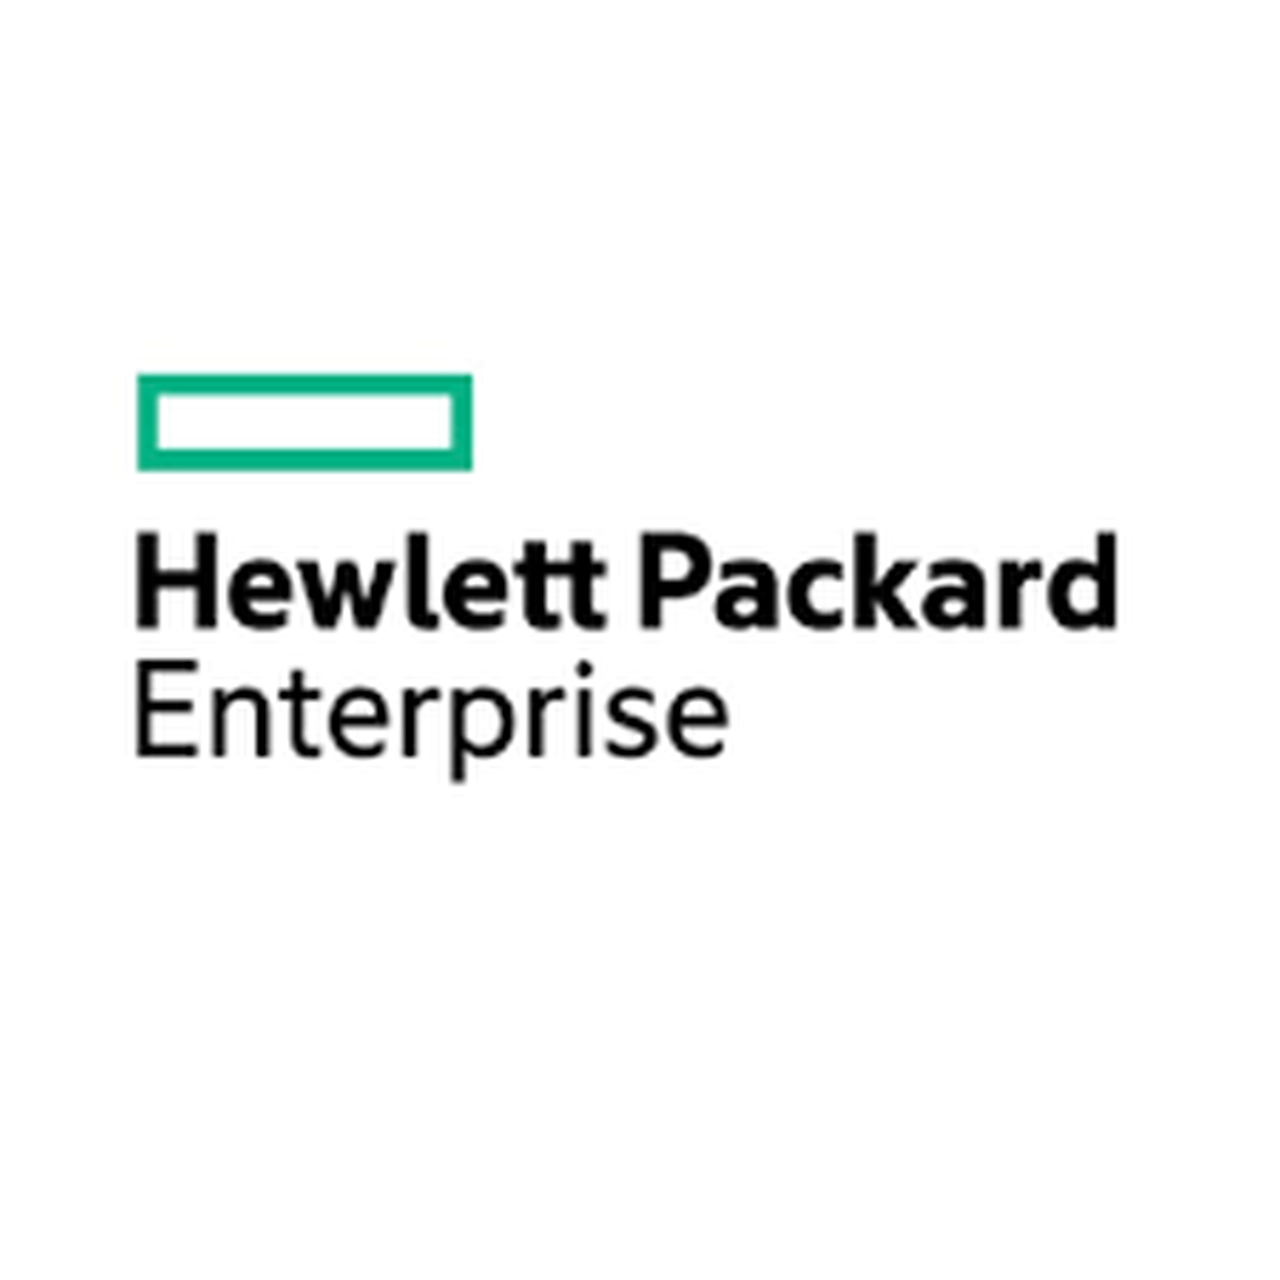 HPE 1 Year Post Warranty Foundation Care, Next Business Day wCDMR BL680c G5 Service